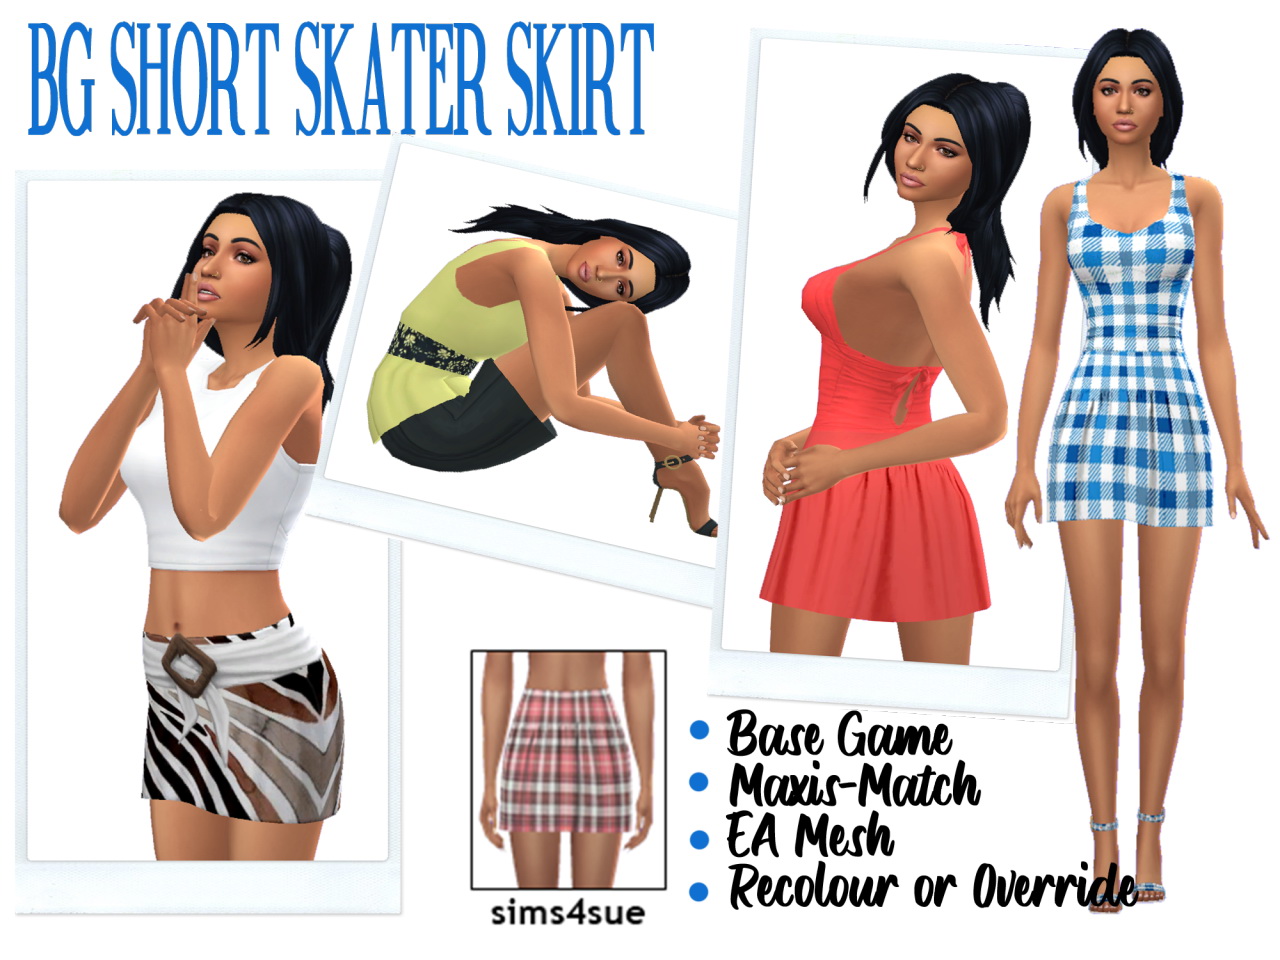 the sims 4 prostitution career mod download